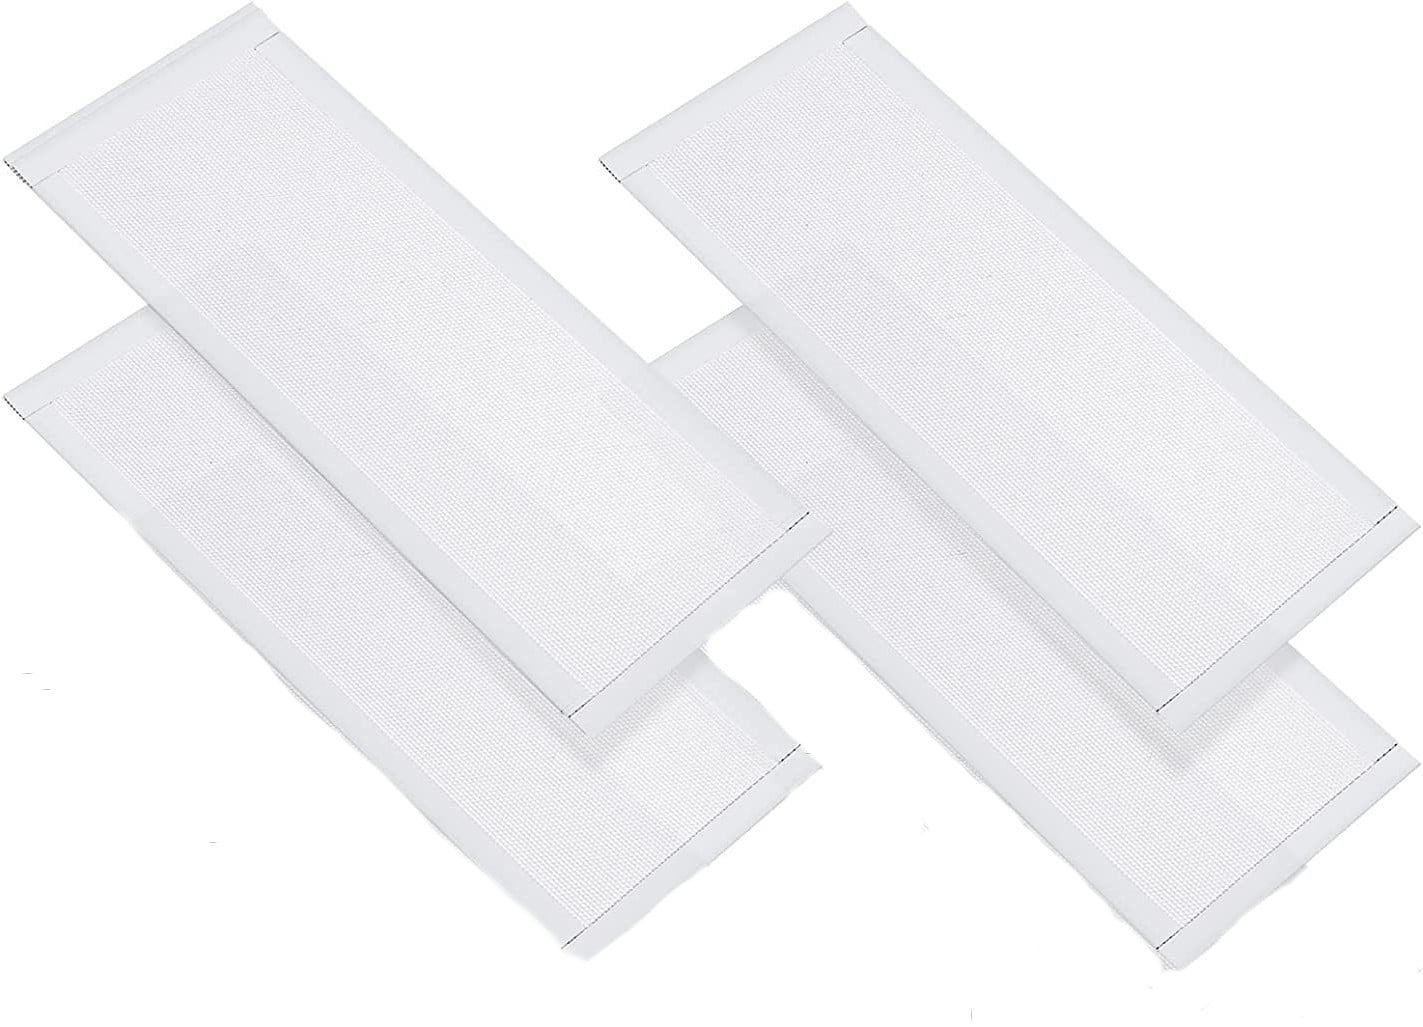 Bluelans 5 Pcs Garbage Dust Bags Floor Register Covers Traps Screen Vent  Screens Home Vent Mesh Elastic Band Filters Catchers Keeps Pet Hair Food  Out